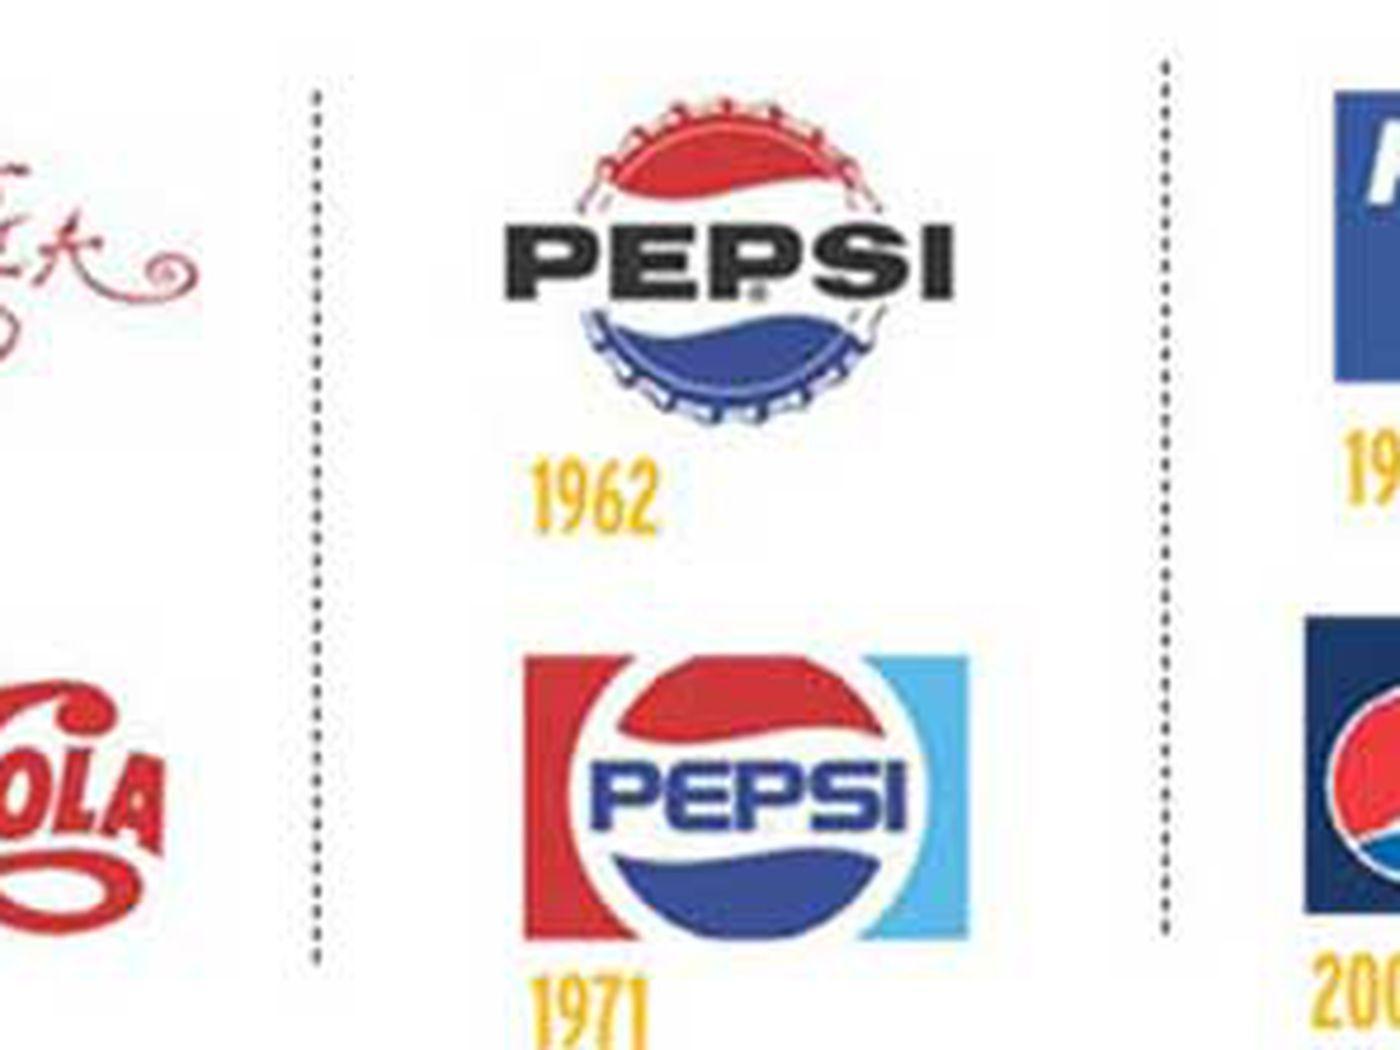 Pepsi 1971 Logo - Pepsi is changing its logo ... again - Eater Chicago